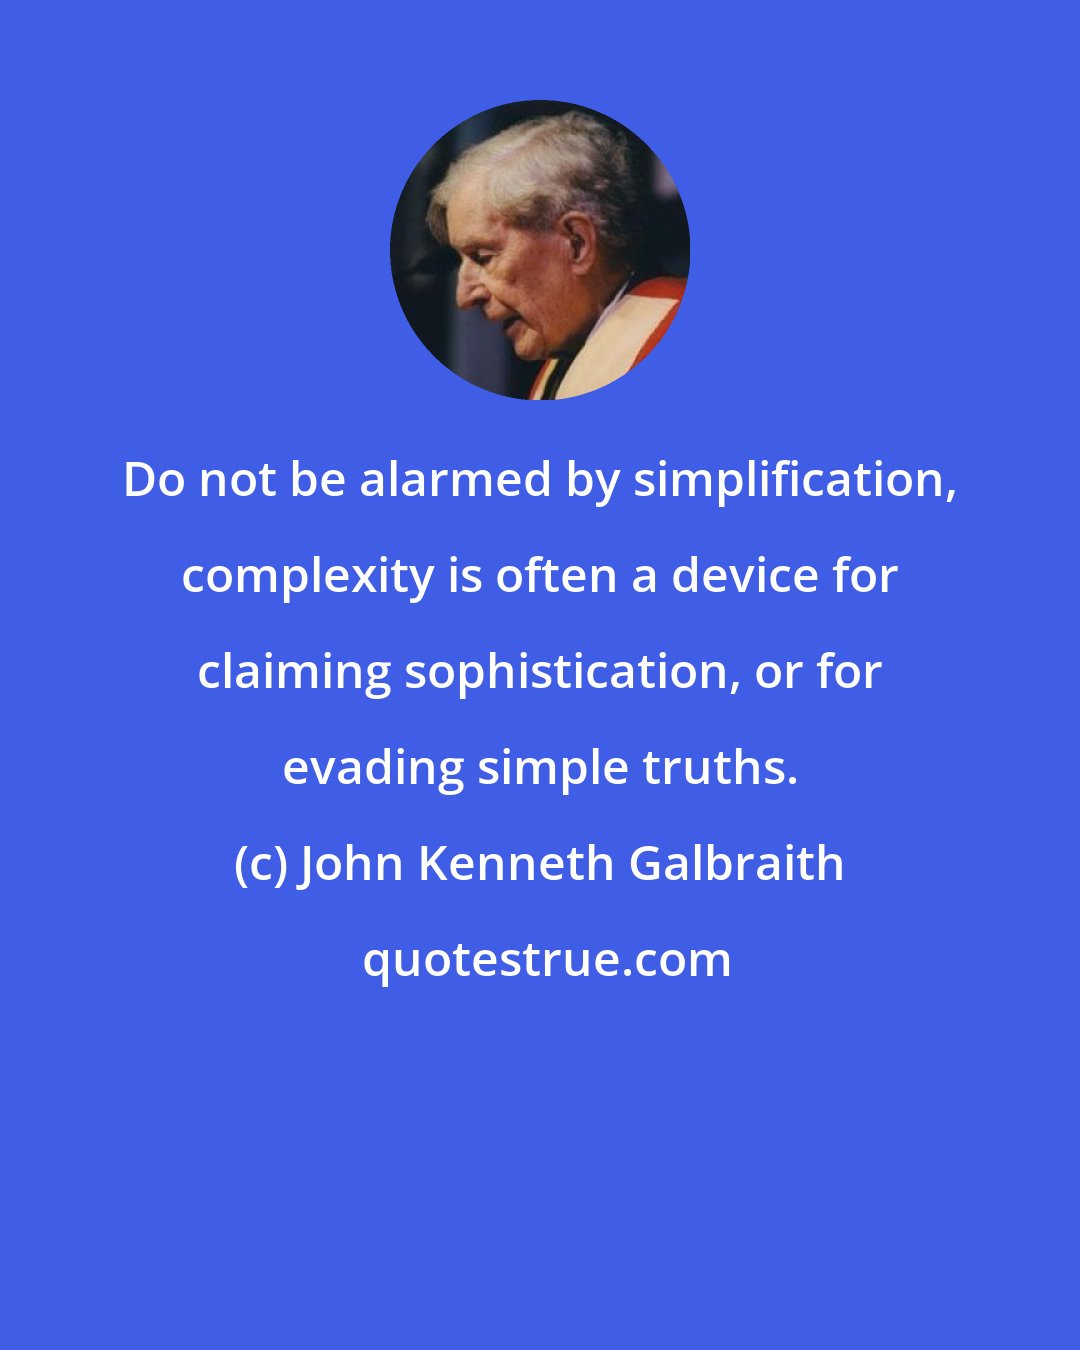 John Kenneth Galbraith: Do not be alarmed by simplification, complexity is often a device for claiming sophistication, or for evading simple truths.